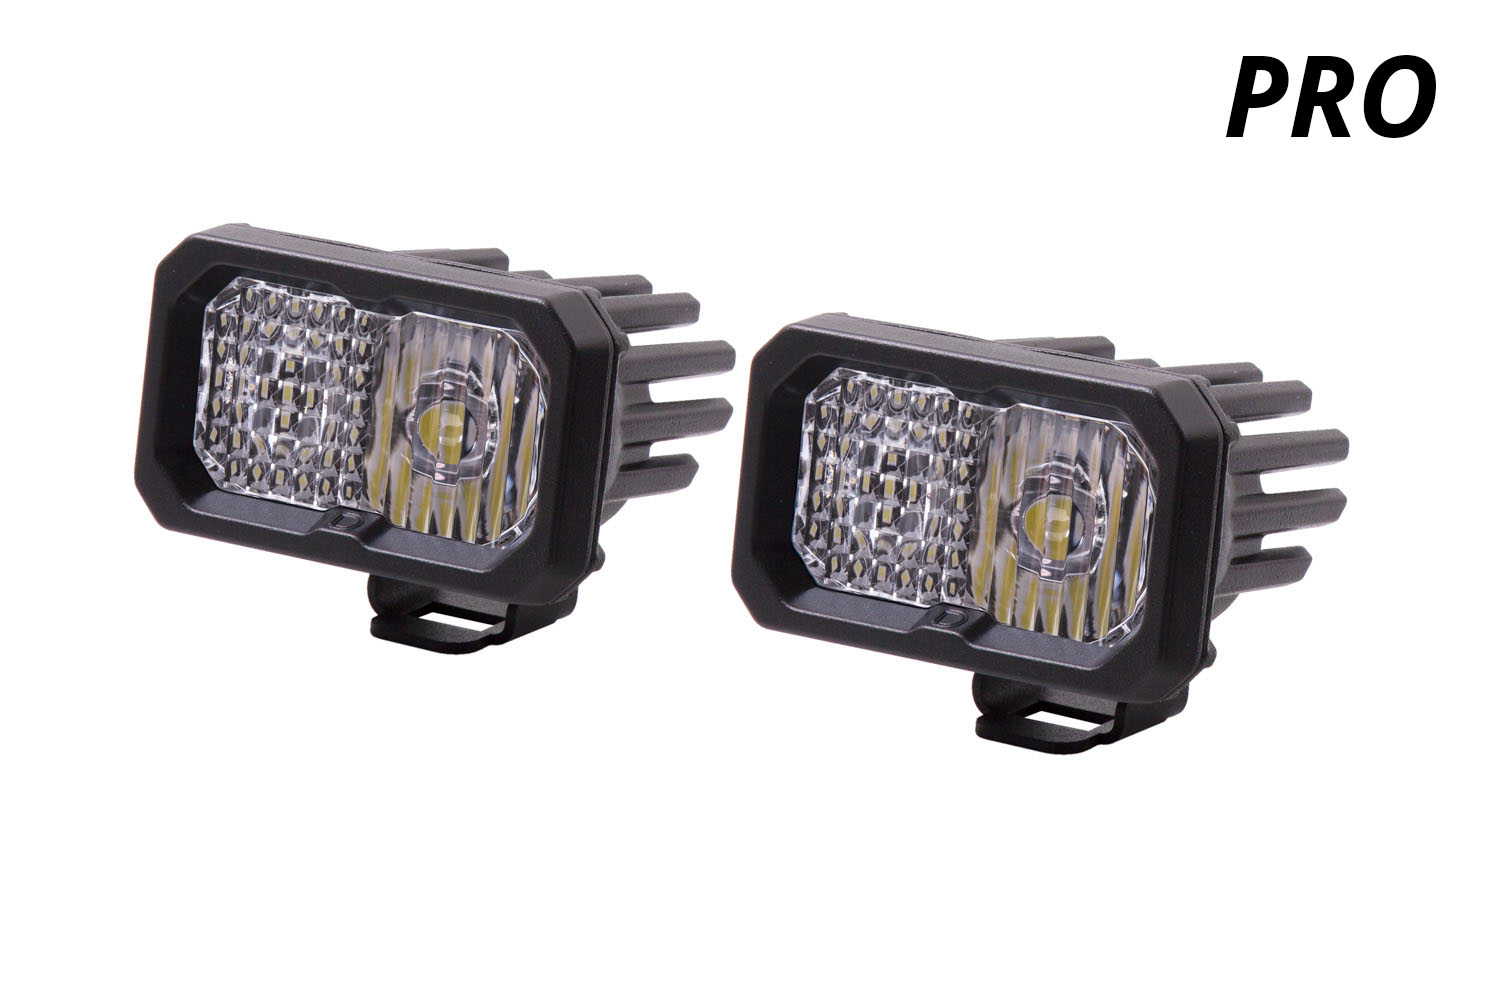 Diode Dynamics Stage Series 2 Inch LED Pod, Pro White Fog Standard ABL Pair - Click Image to Close